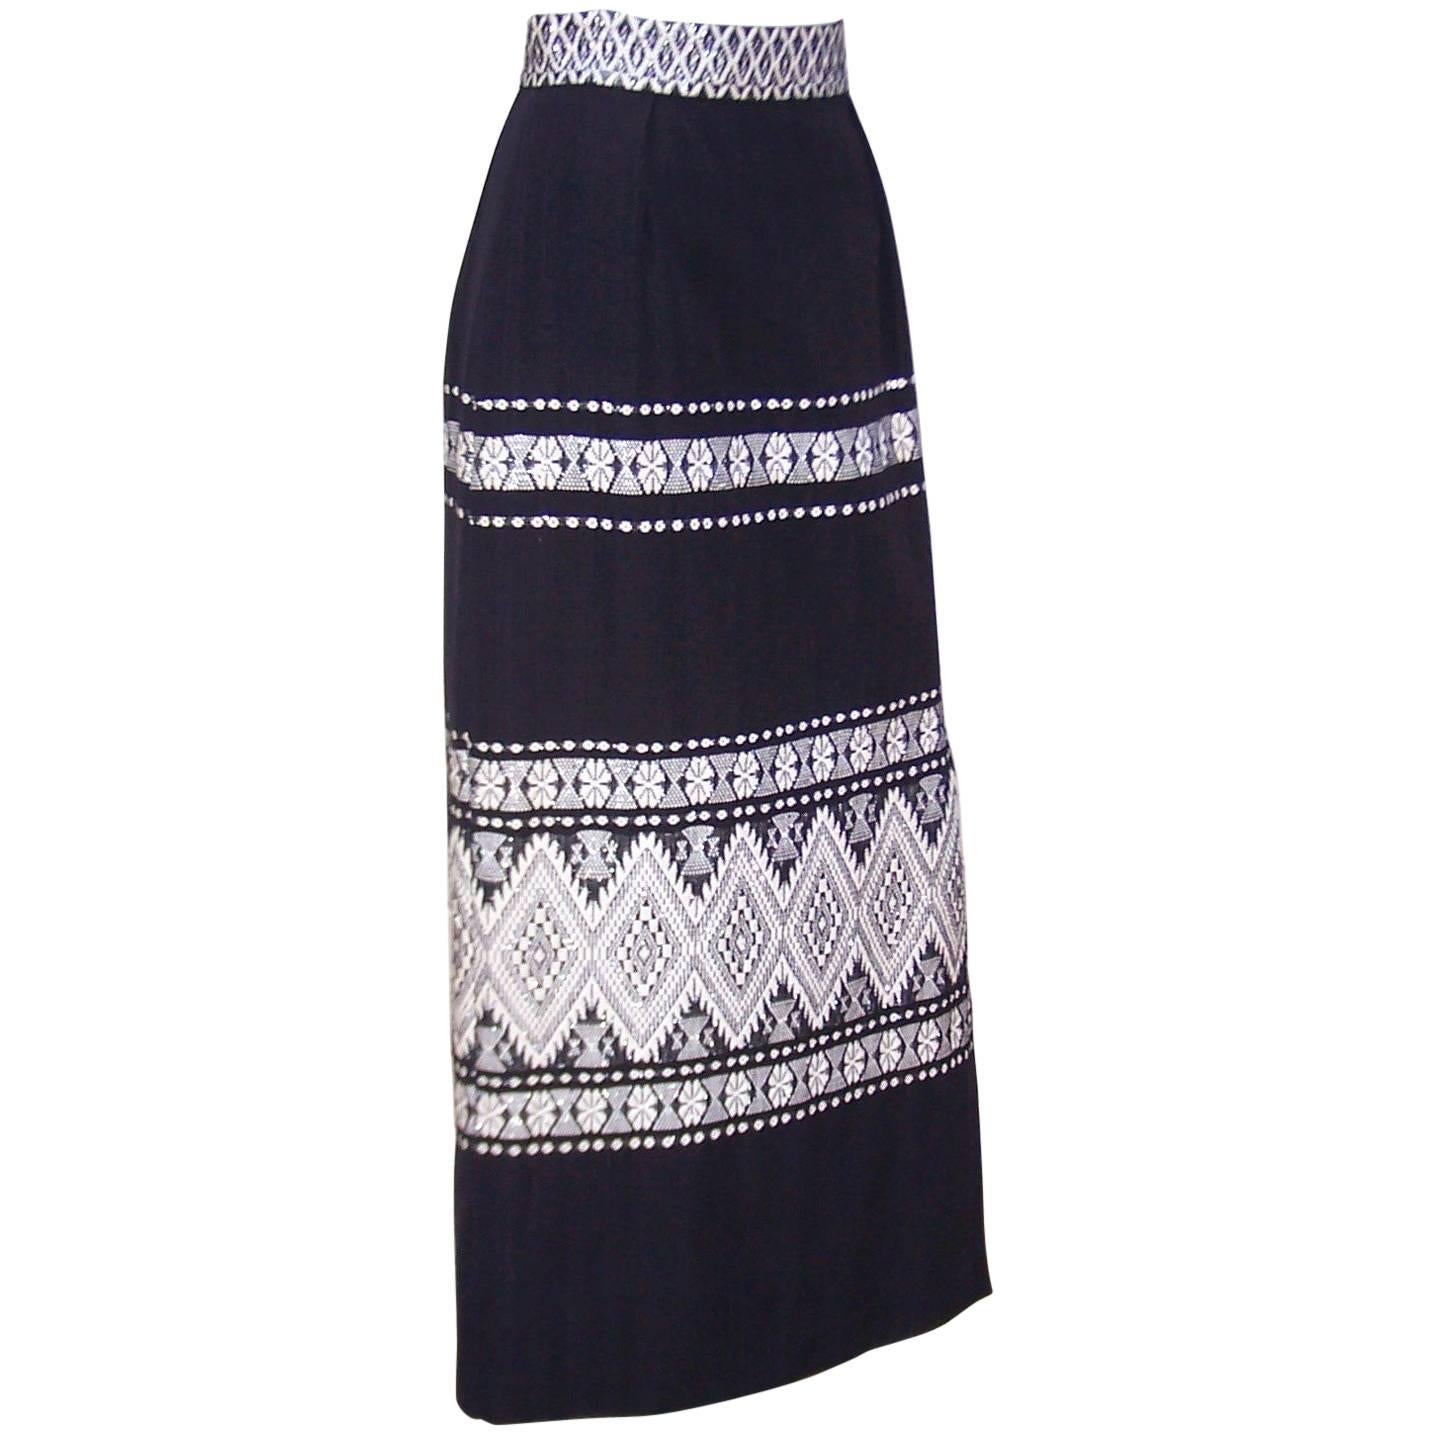 Graphic C.1970 Mexican Folkloric Cotton Maxi Skirt